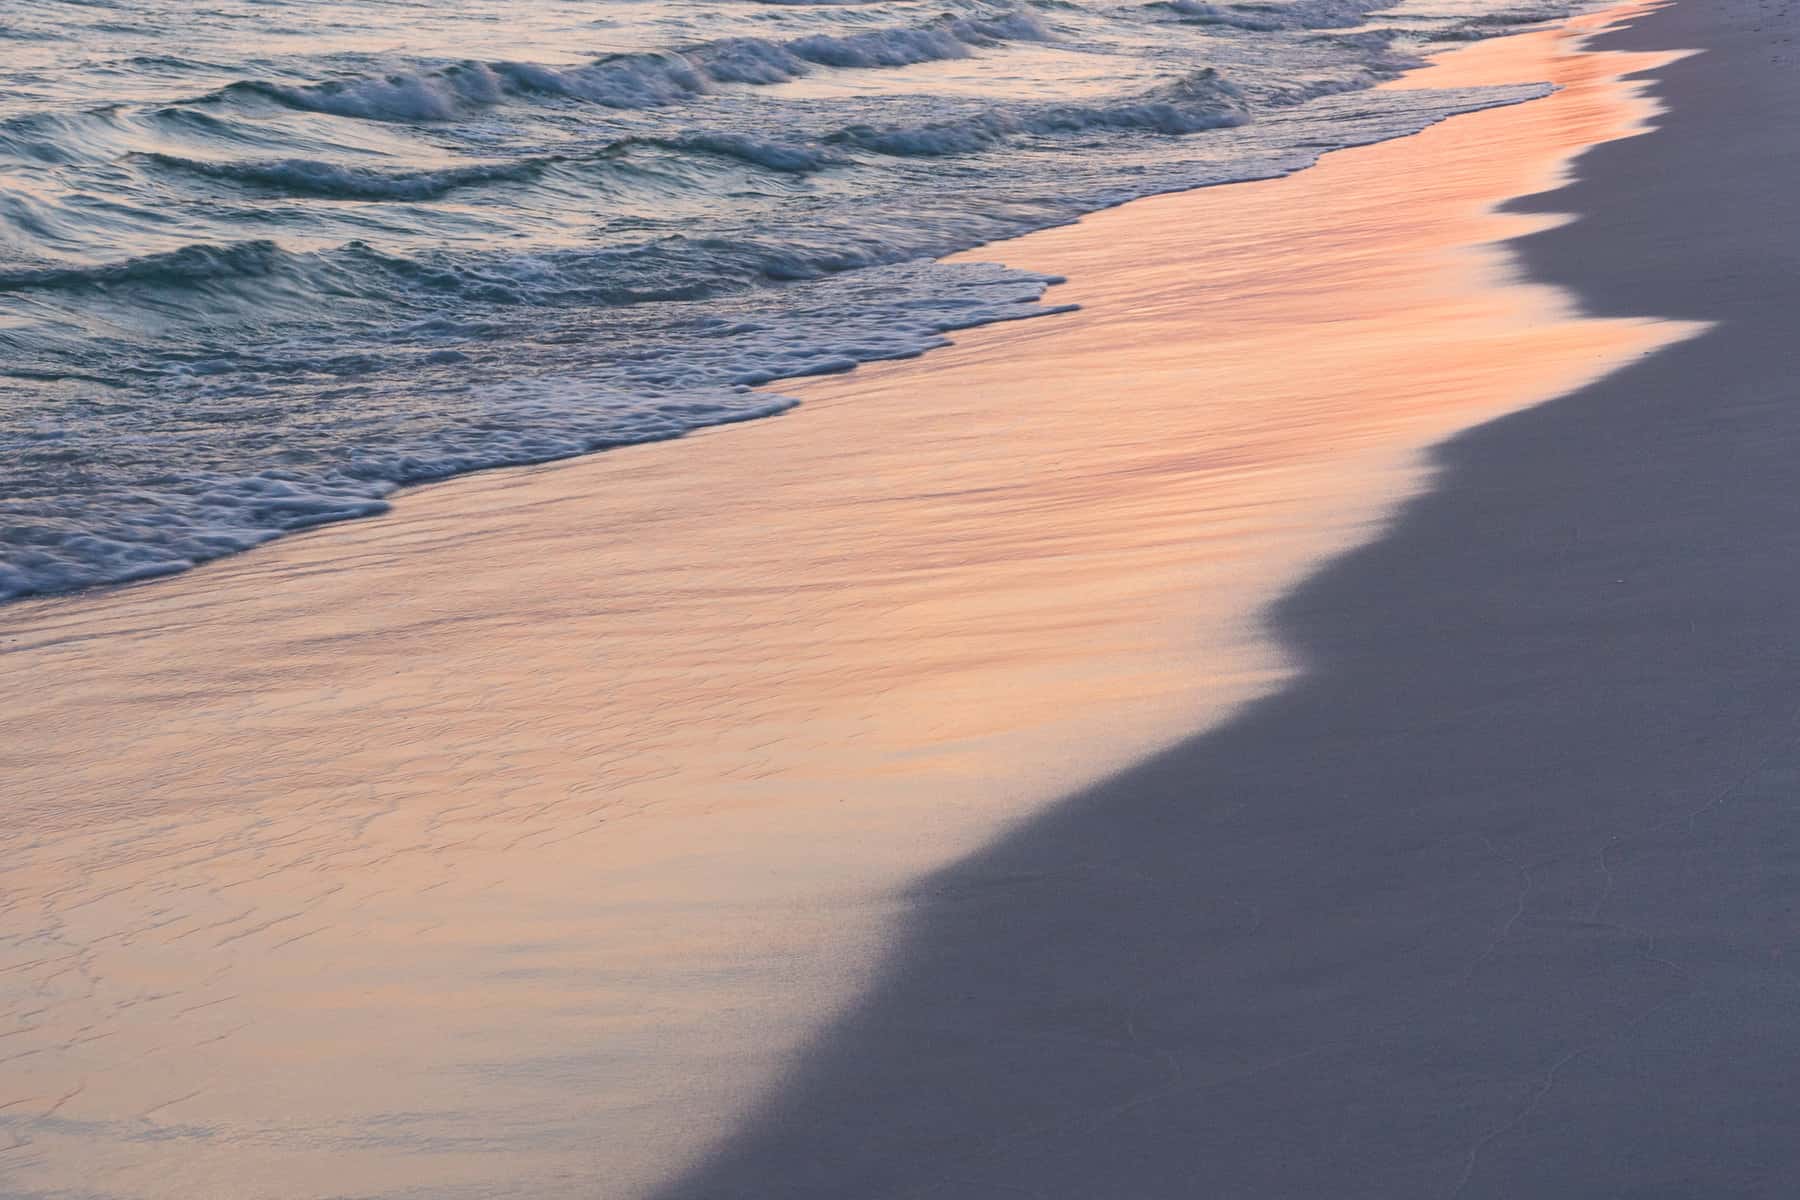 Ocean waves are shown sliding back into off of sand with the newly soaked sand reflecting the pink sunset light.